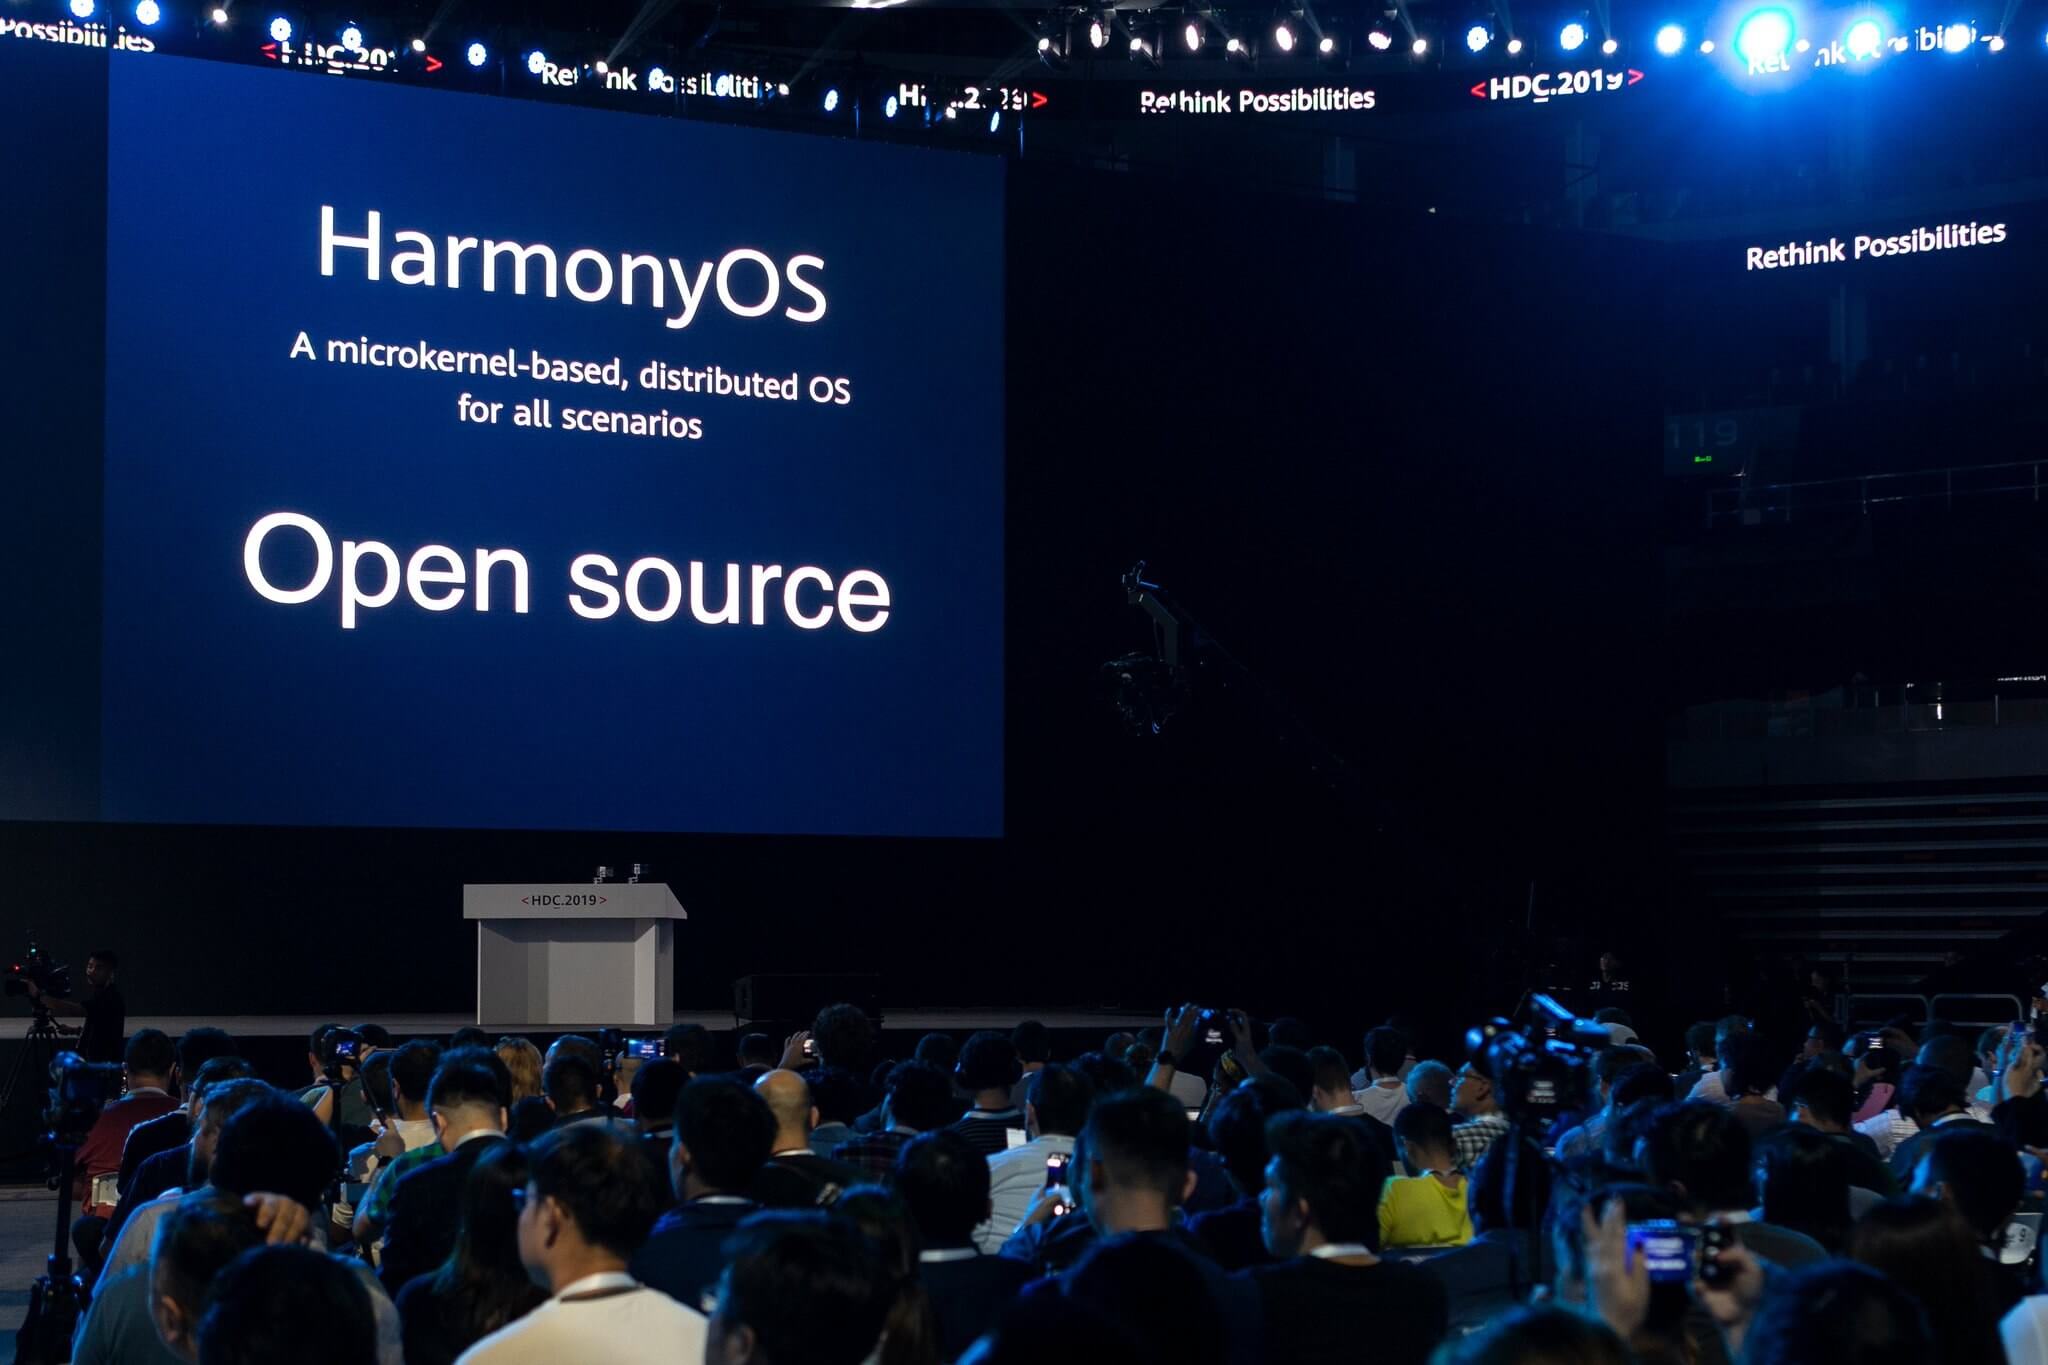 Huawei: there will be no HarmonyOS phones this year